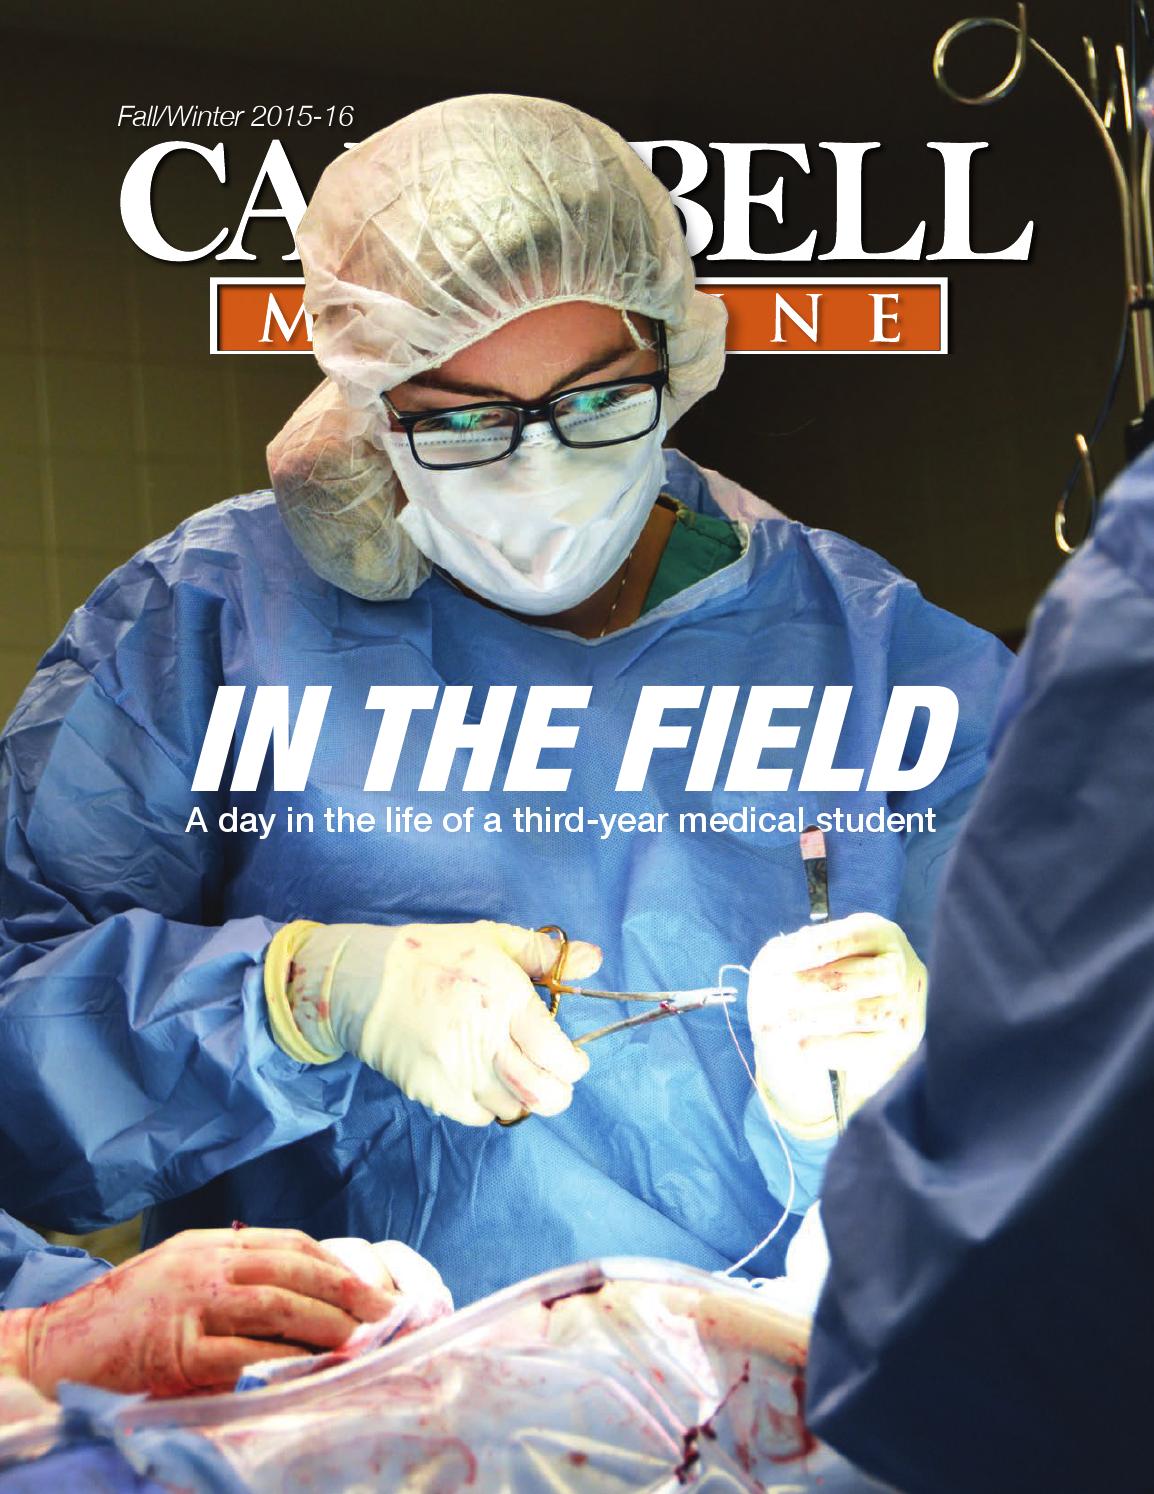 "In the Field | A Day in the Life of a Third-Year Medical Student"